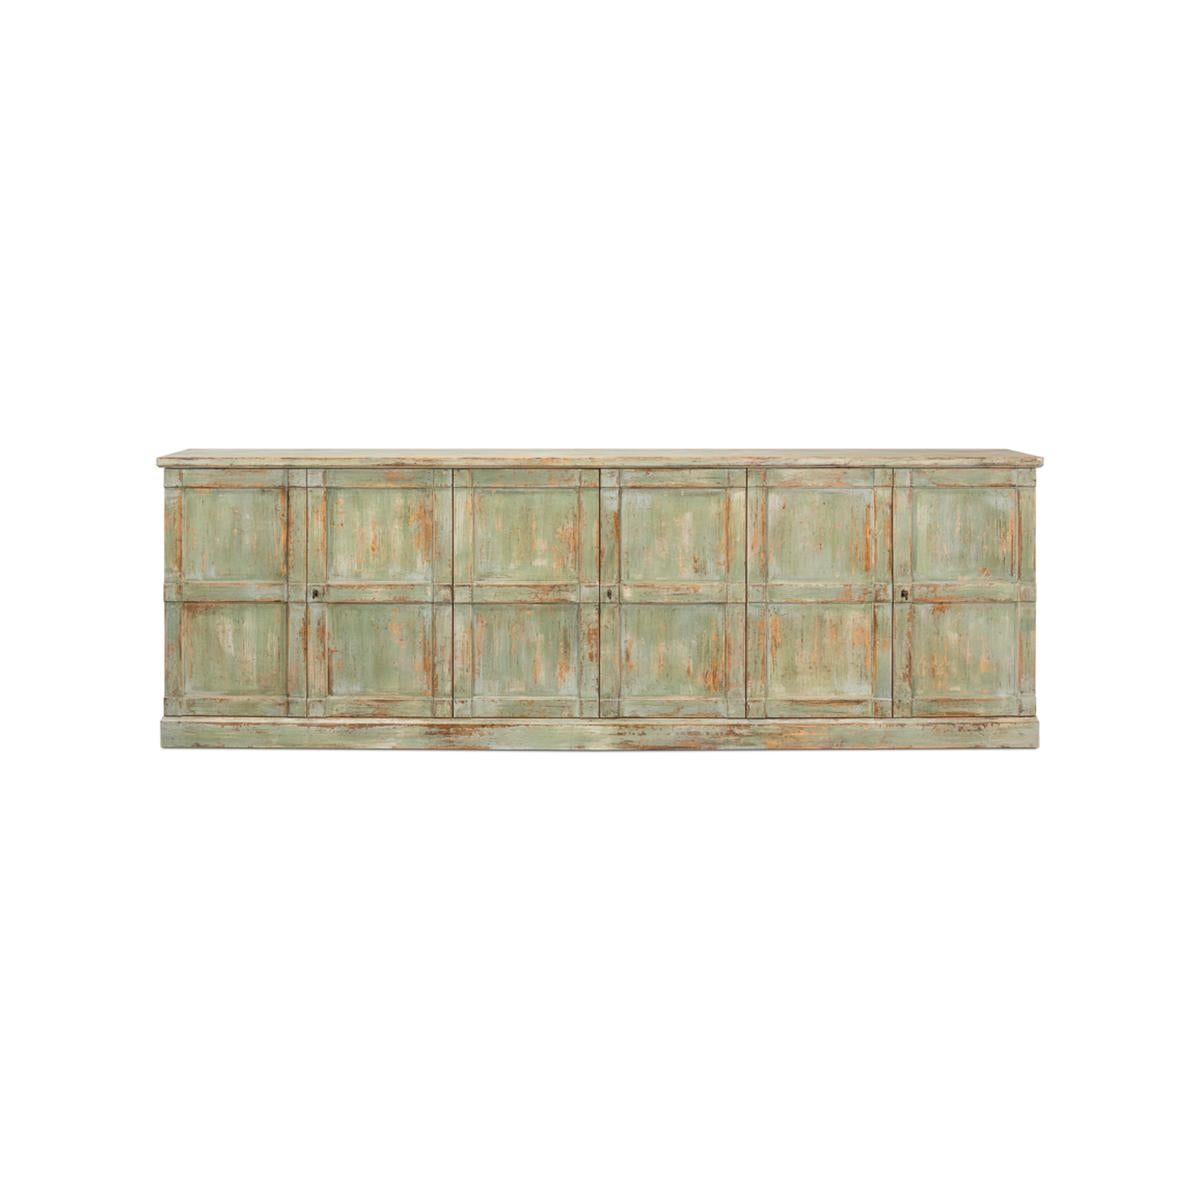 Made of pine finished in a sage finish that is antiqued and distressed. With six doors, a rectangular form and a perfect depth of 15